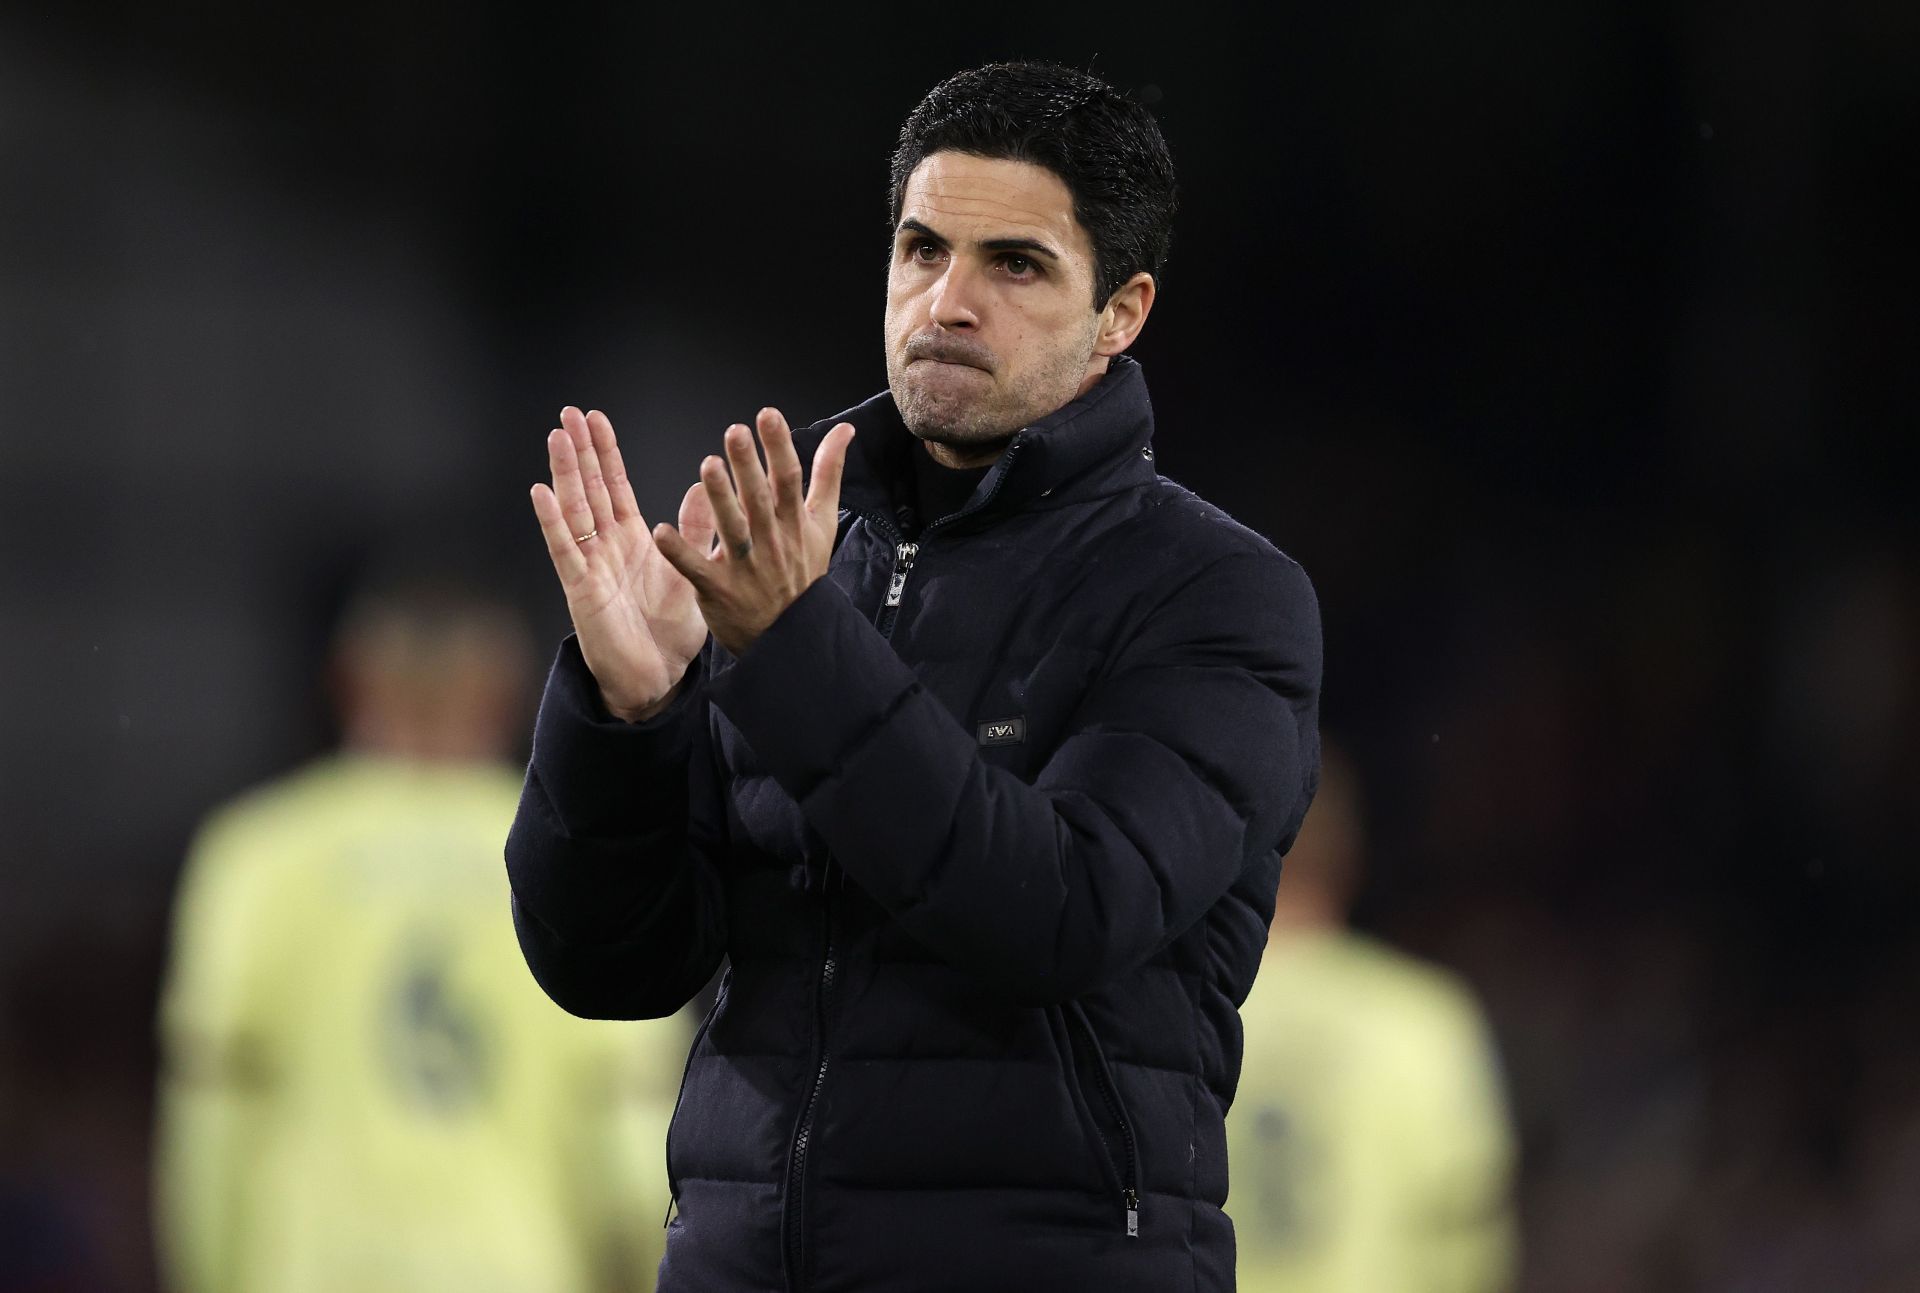 Arsenal manager Mikel Arteta desperately needs a win against Chelsea.